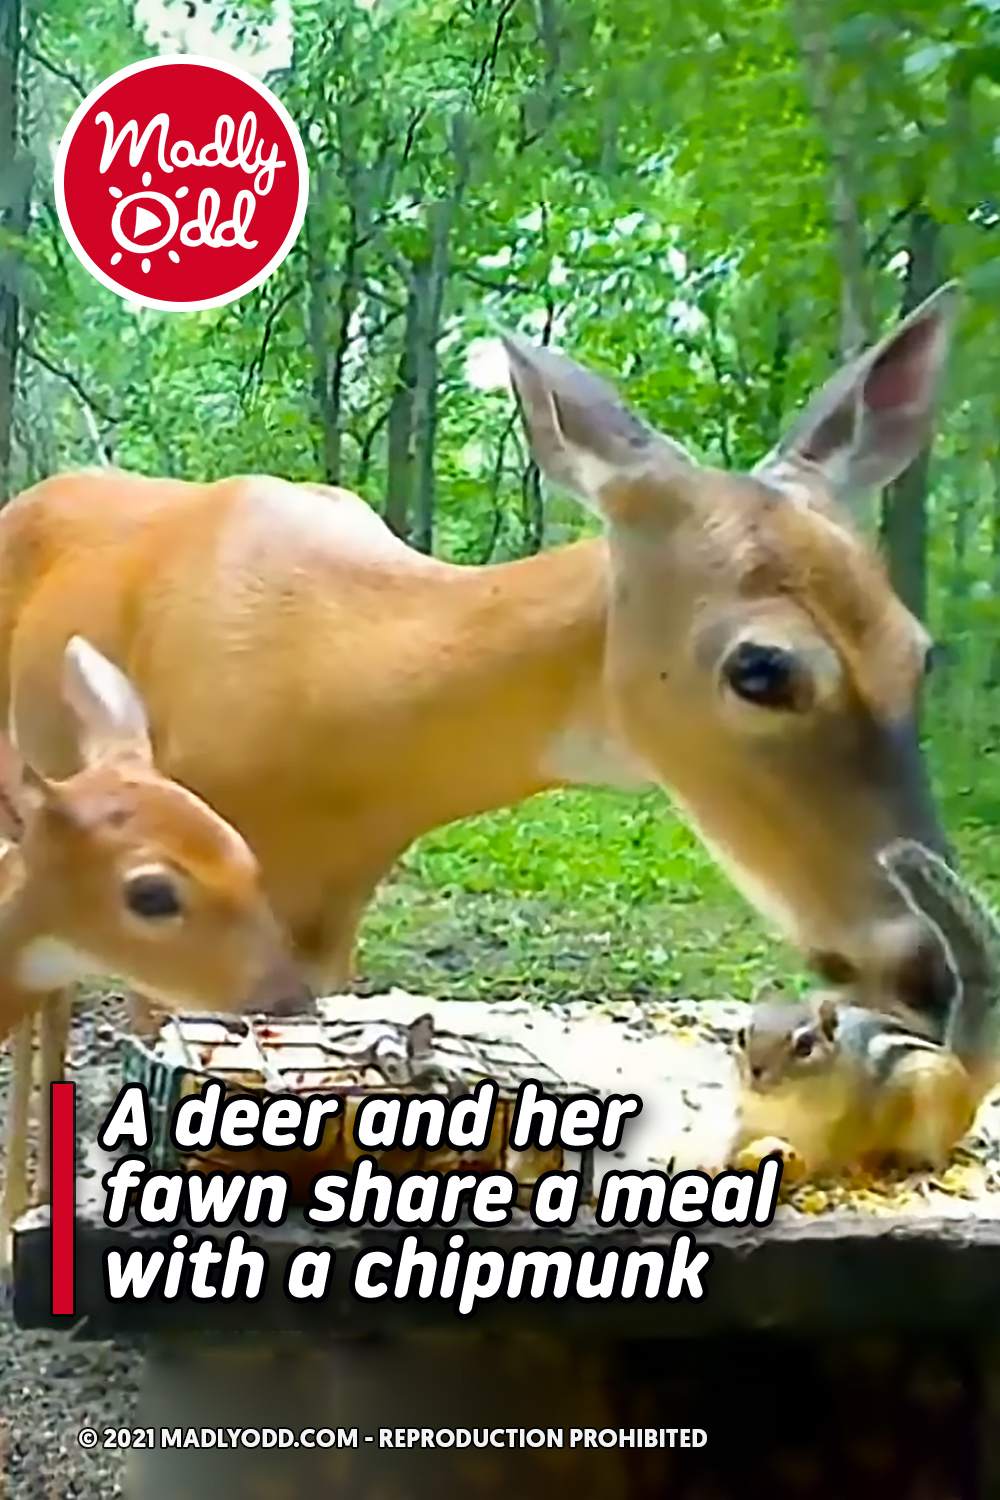 A deer and her fawn share a meal with a chipmunk